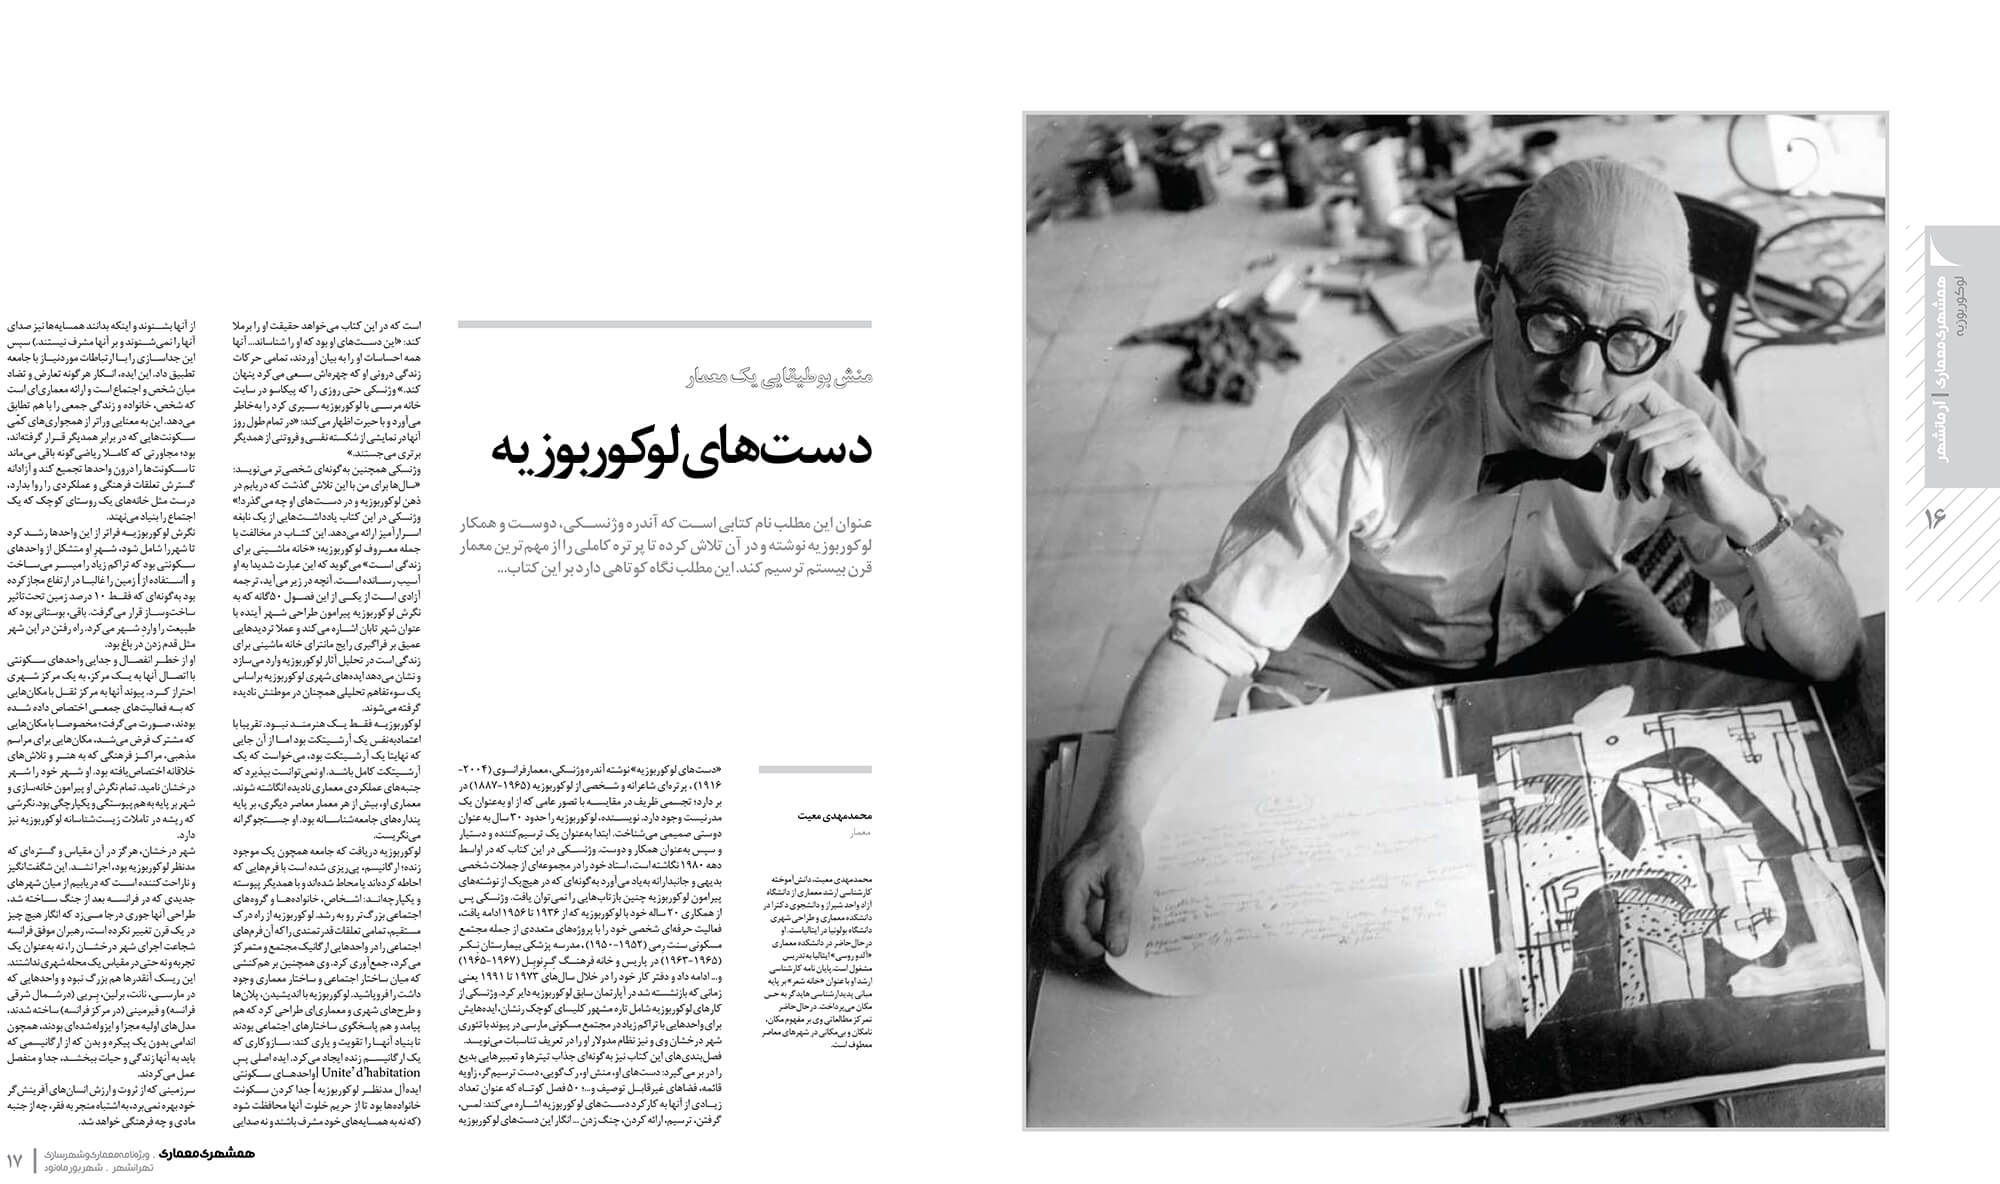 picture no. 4 of publication: The Knights of Oral Architecture, author: Kambiz Moshtaq